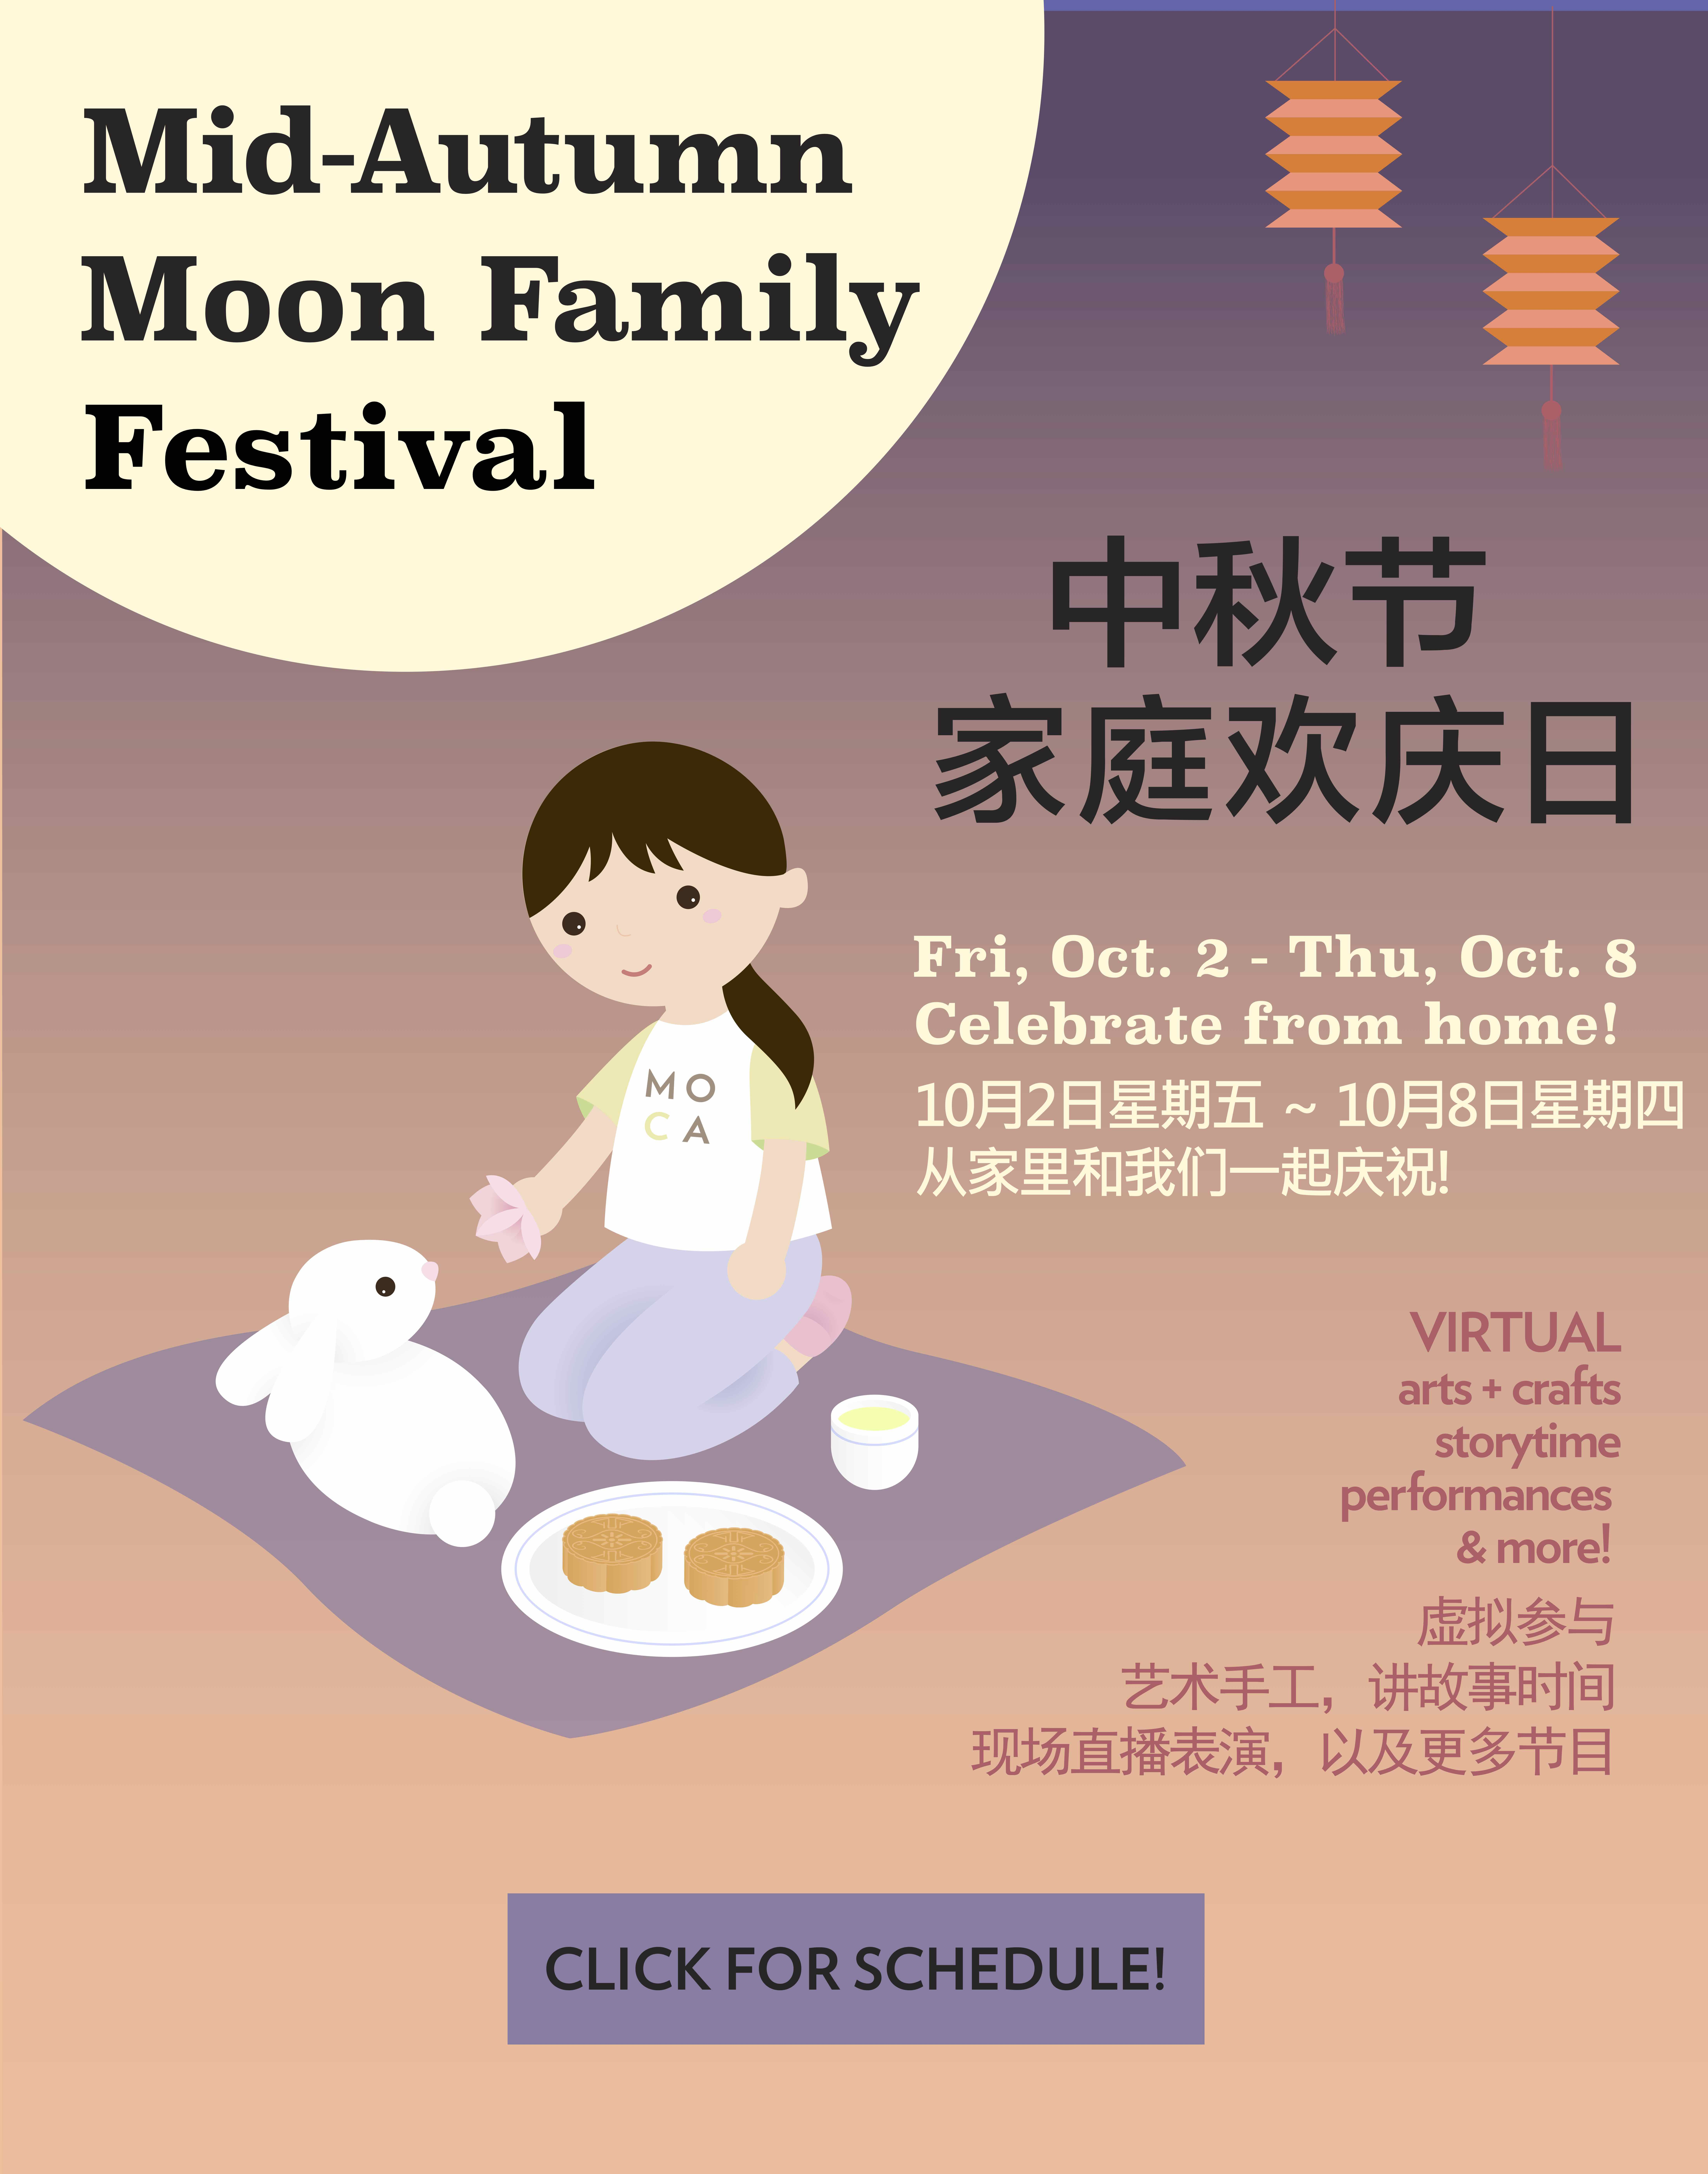 Click to check out the schedule for our virtual Mid-Autumn Moon Family Festival!